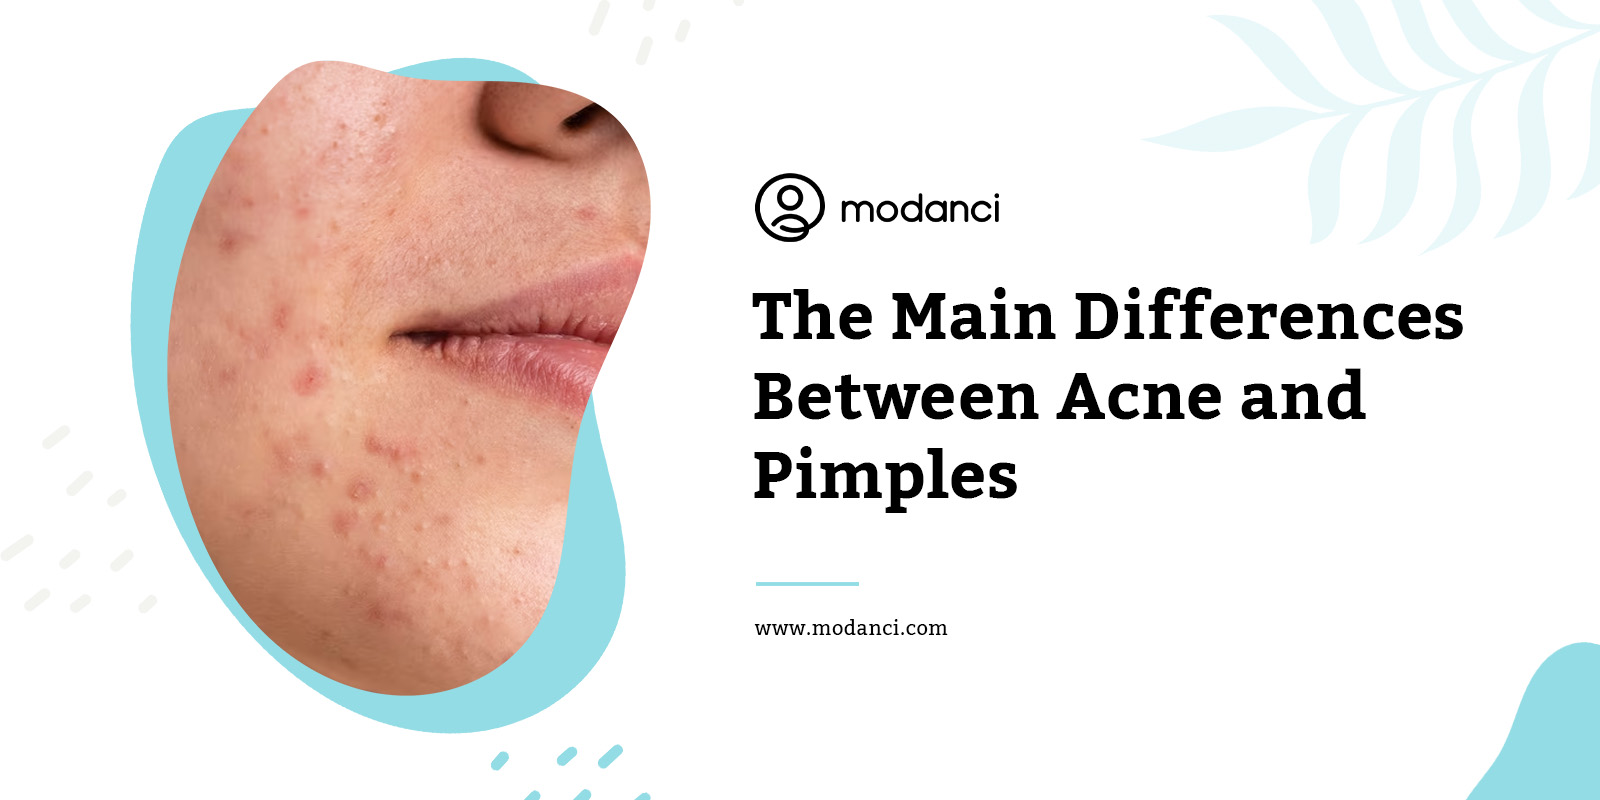 acne and pimple difference